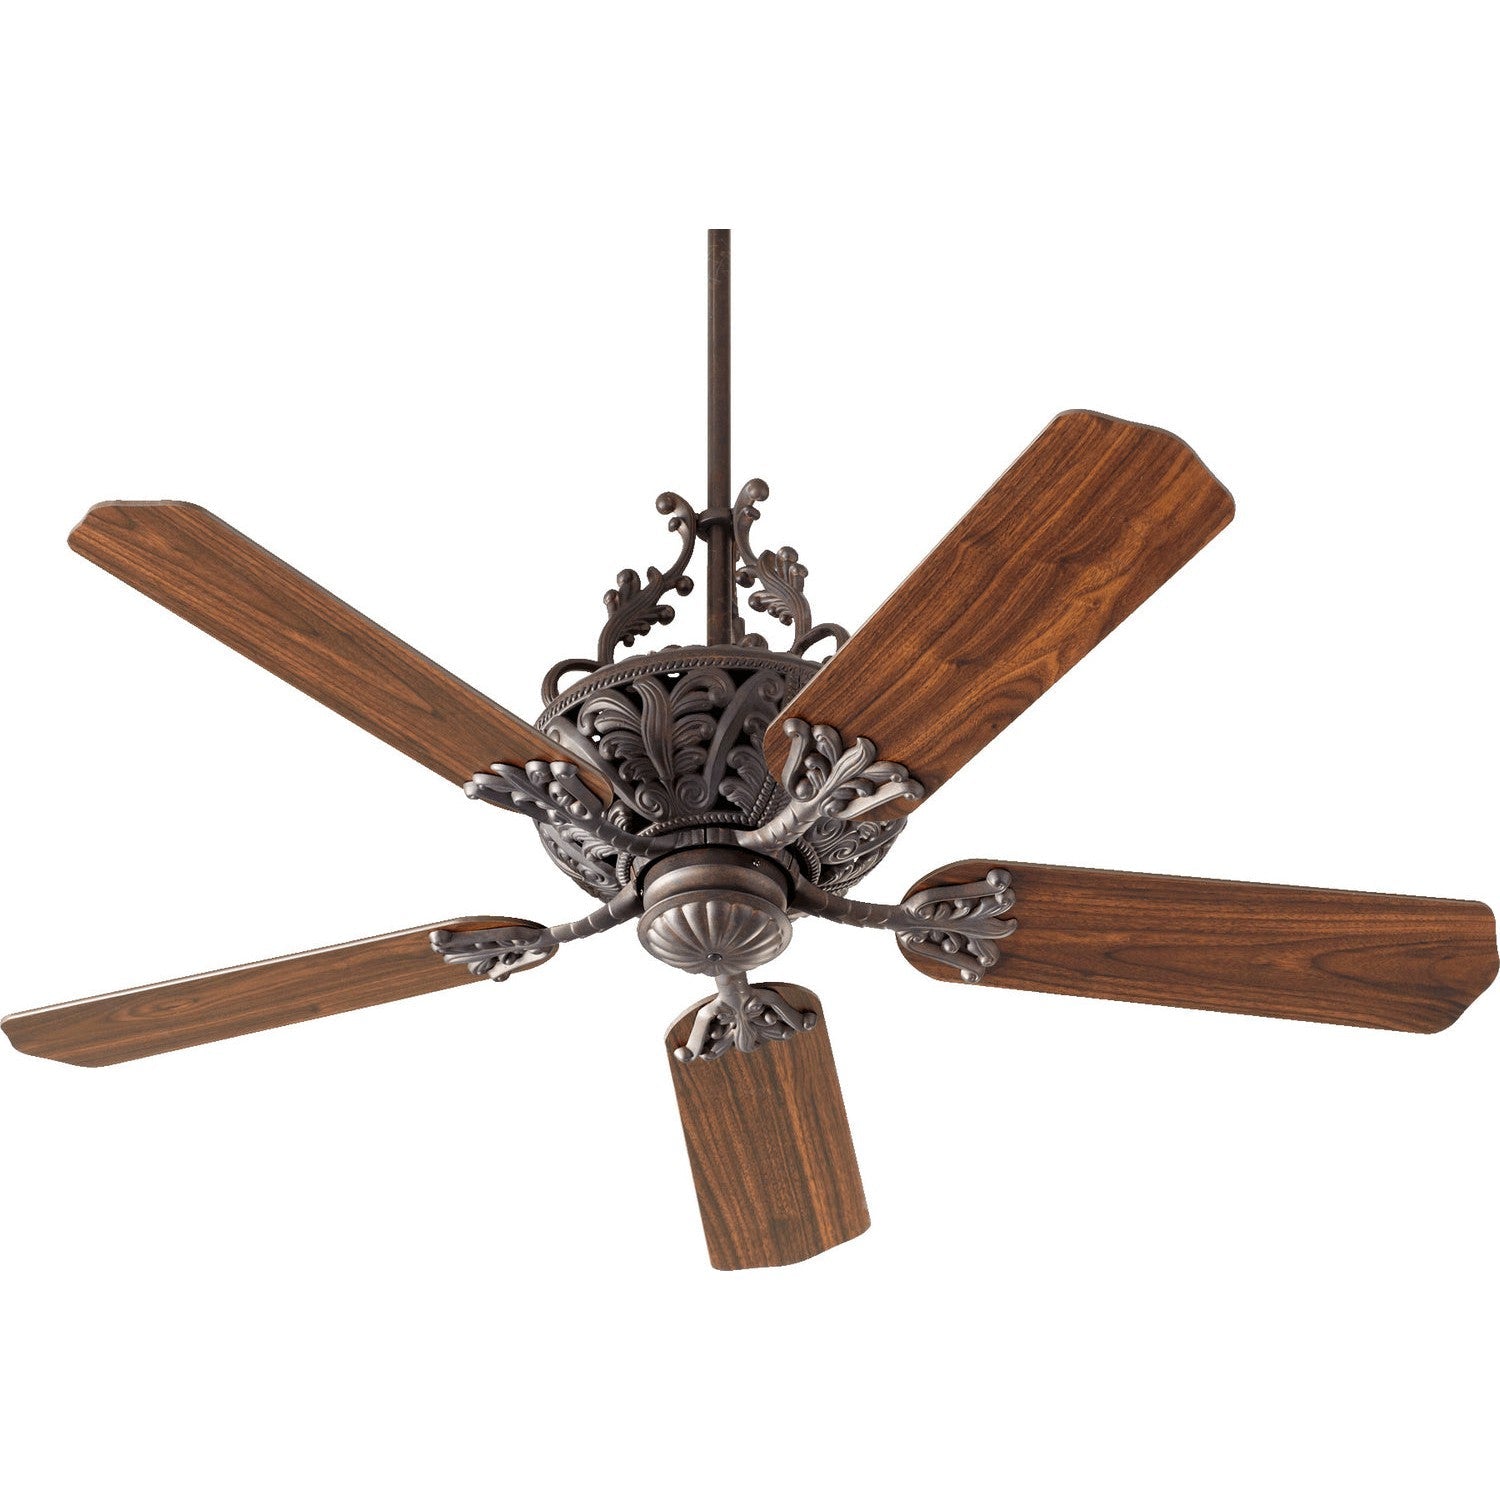 Quorum Windsor 85525-44 Ceiling Fan 52 in. - Toasted Sienna, Rosewood/Walnut